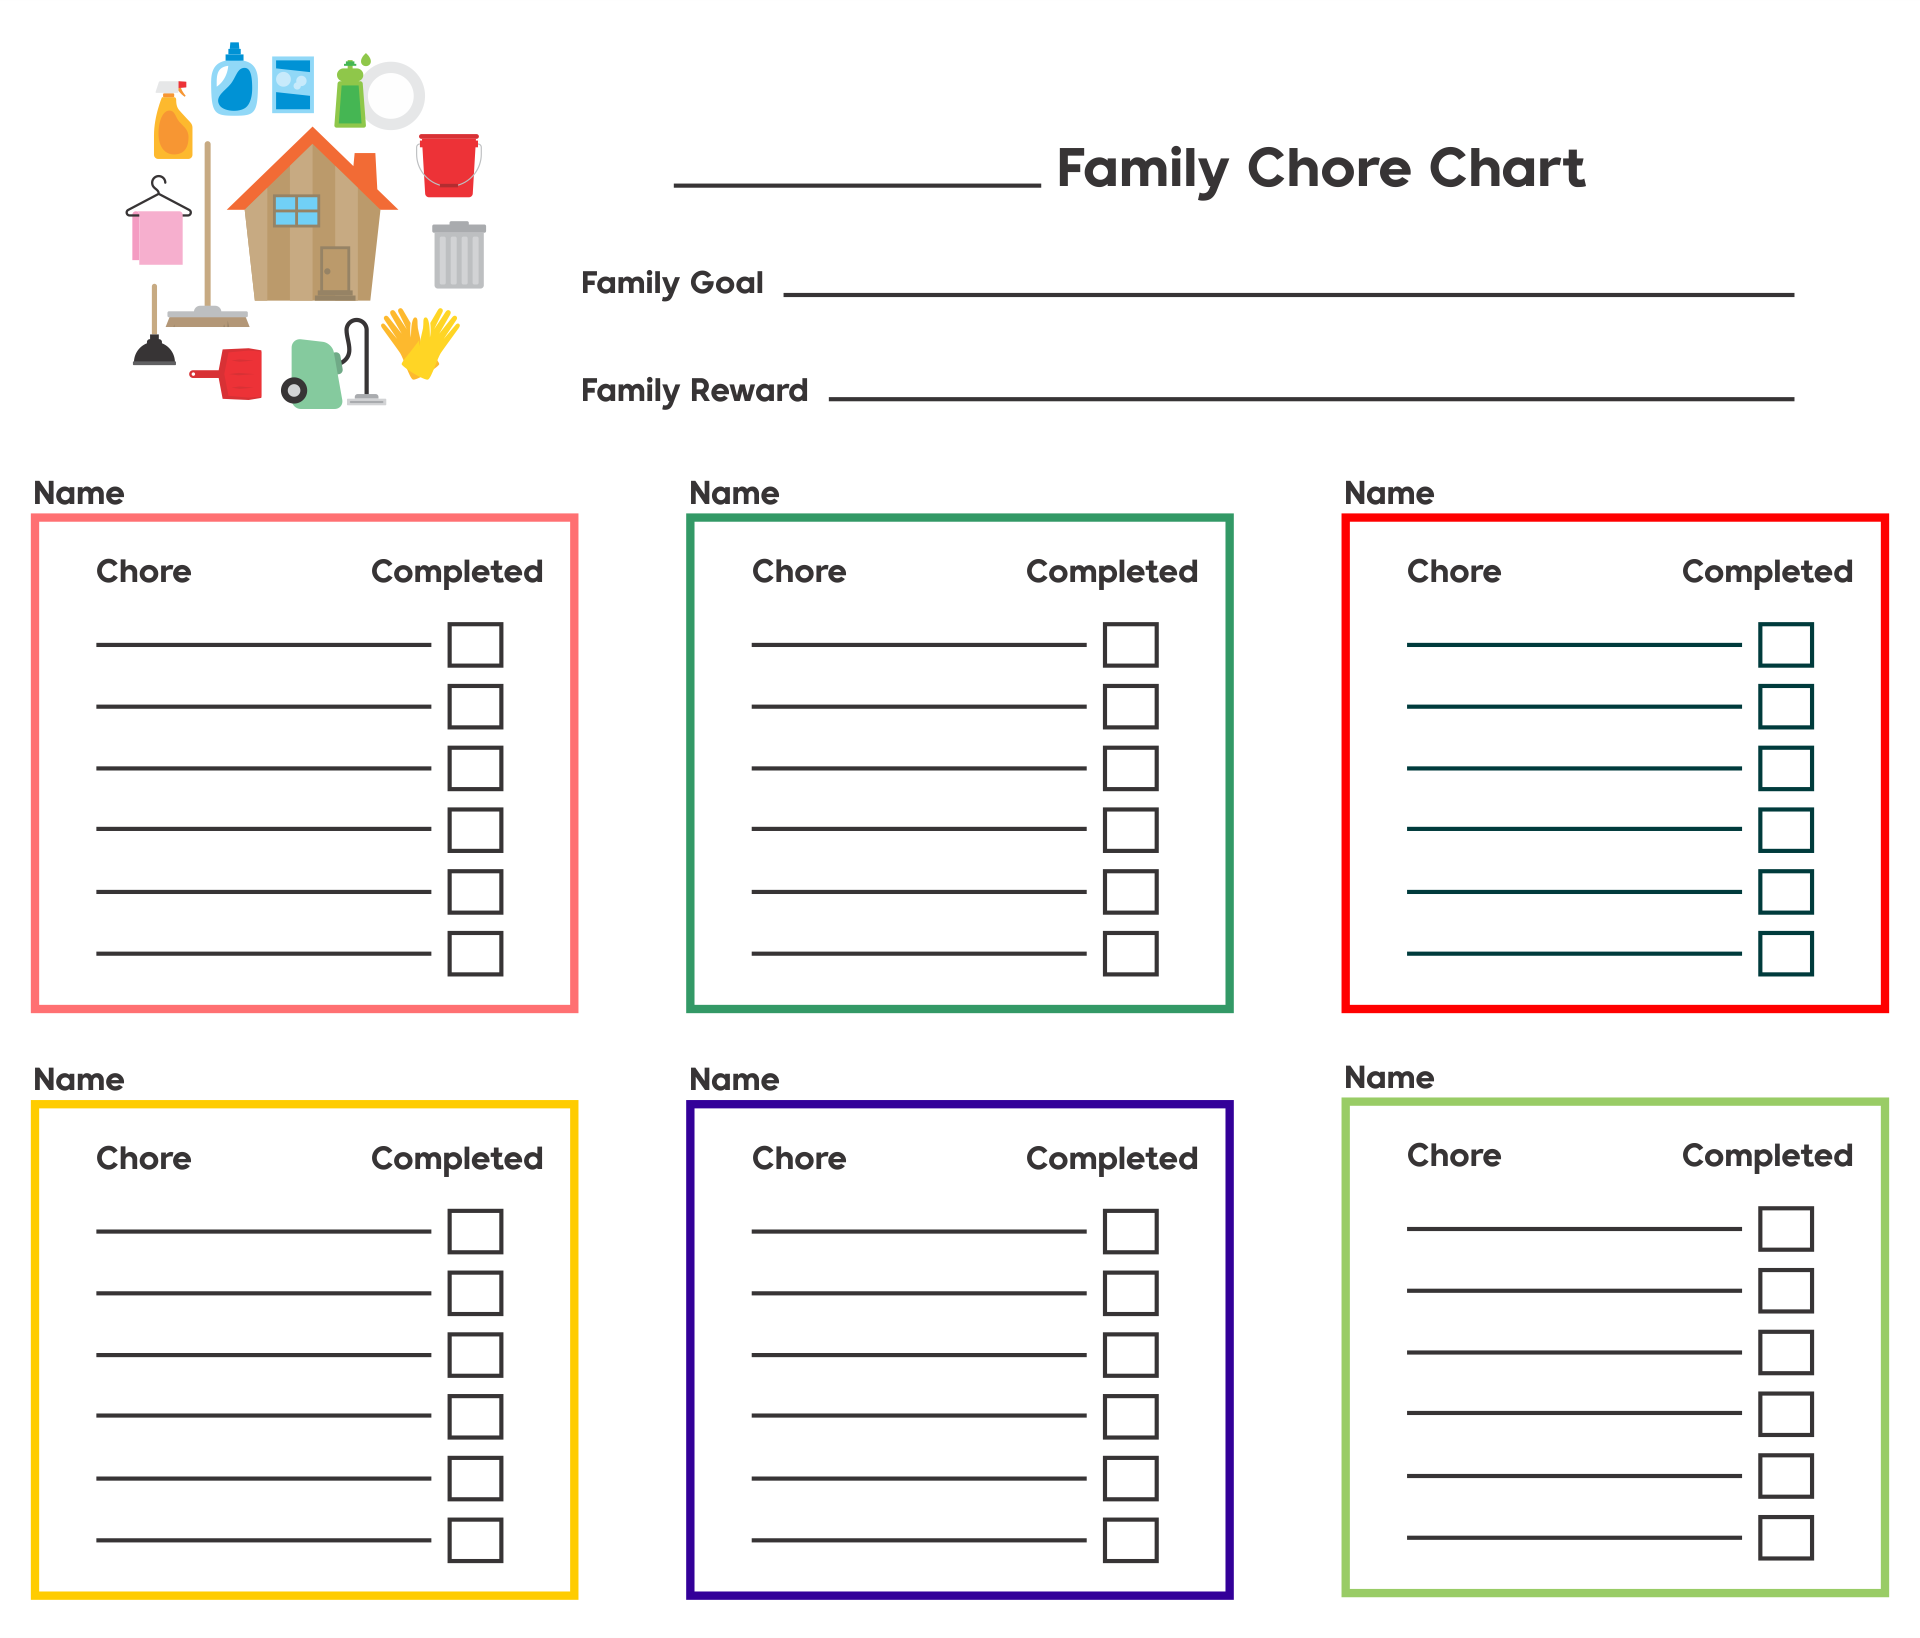 paper-paper-party-supplies-family-chores-kids-chores-family-chore-charts-printable-simple